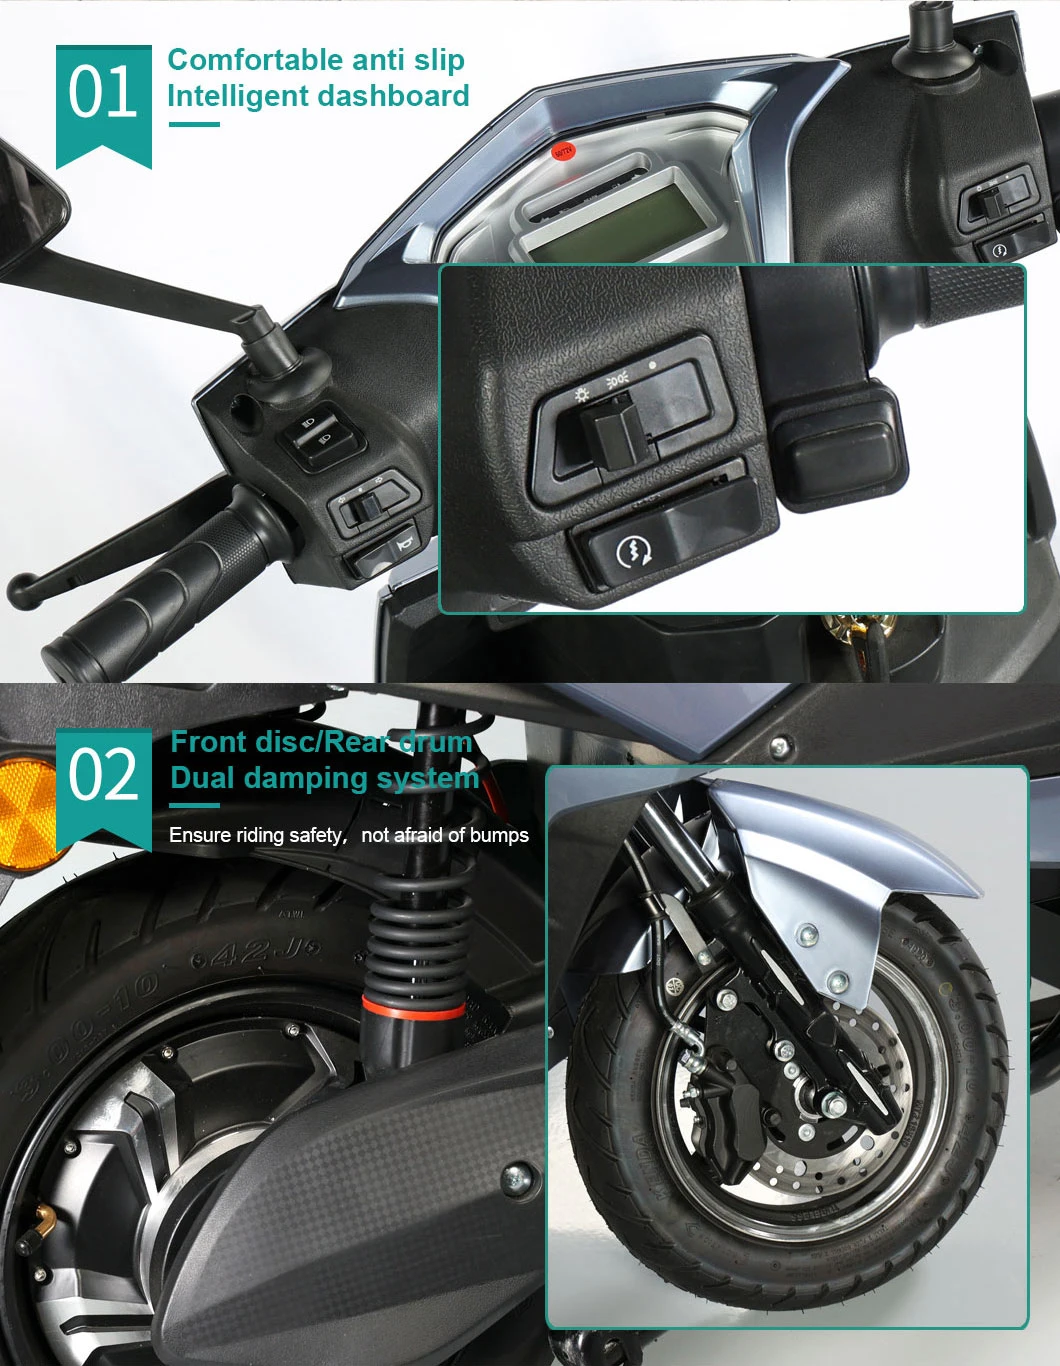 Cheap Price off Sports Electric Moped Motorcycle Scooter Electrical Cycle Good Design Best OEM Branding CKD/SKD Adult Electric Motorcycle